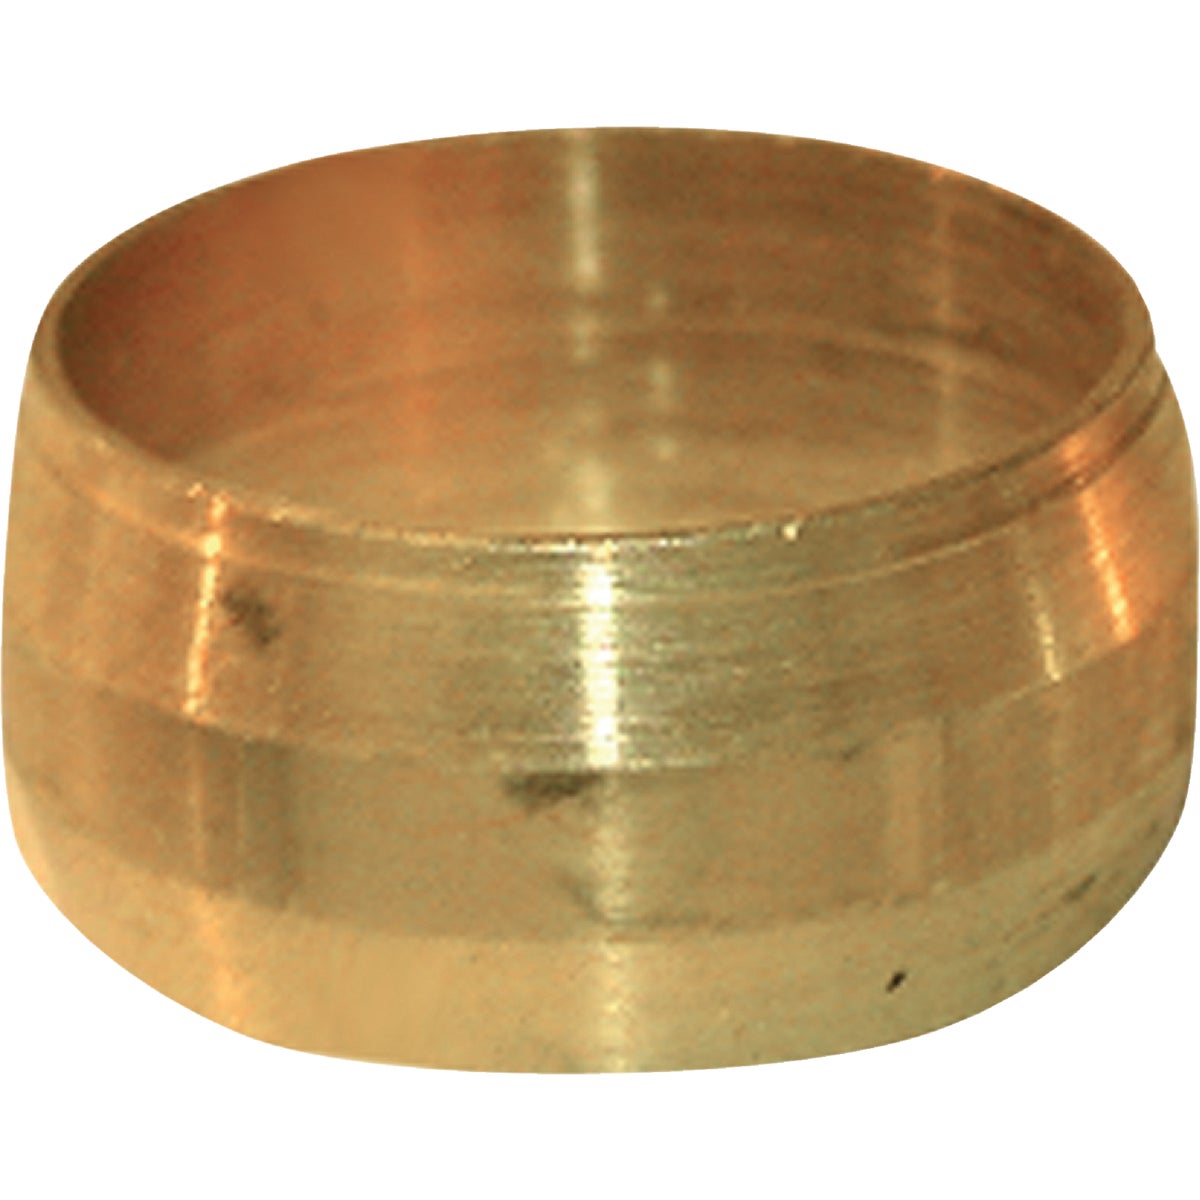 Lasco 5/8 In. Brass Compression Sleeve (2-Pack)